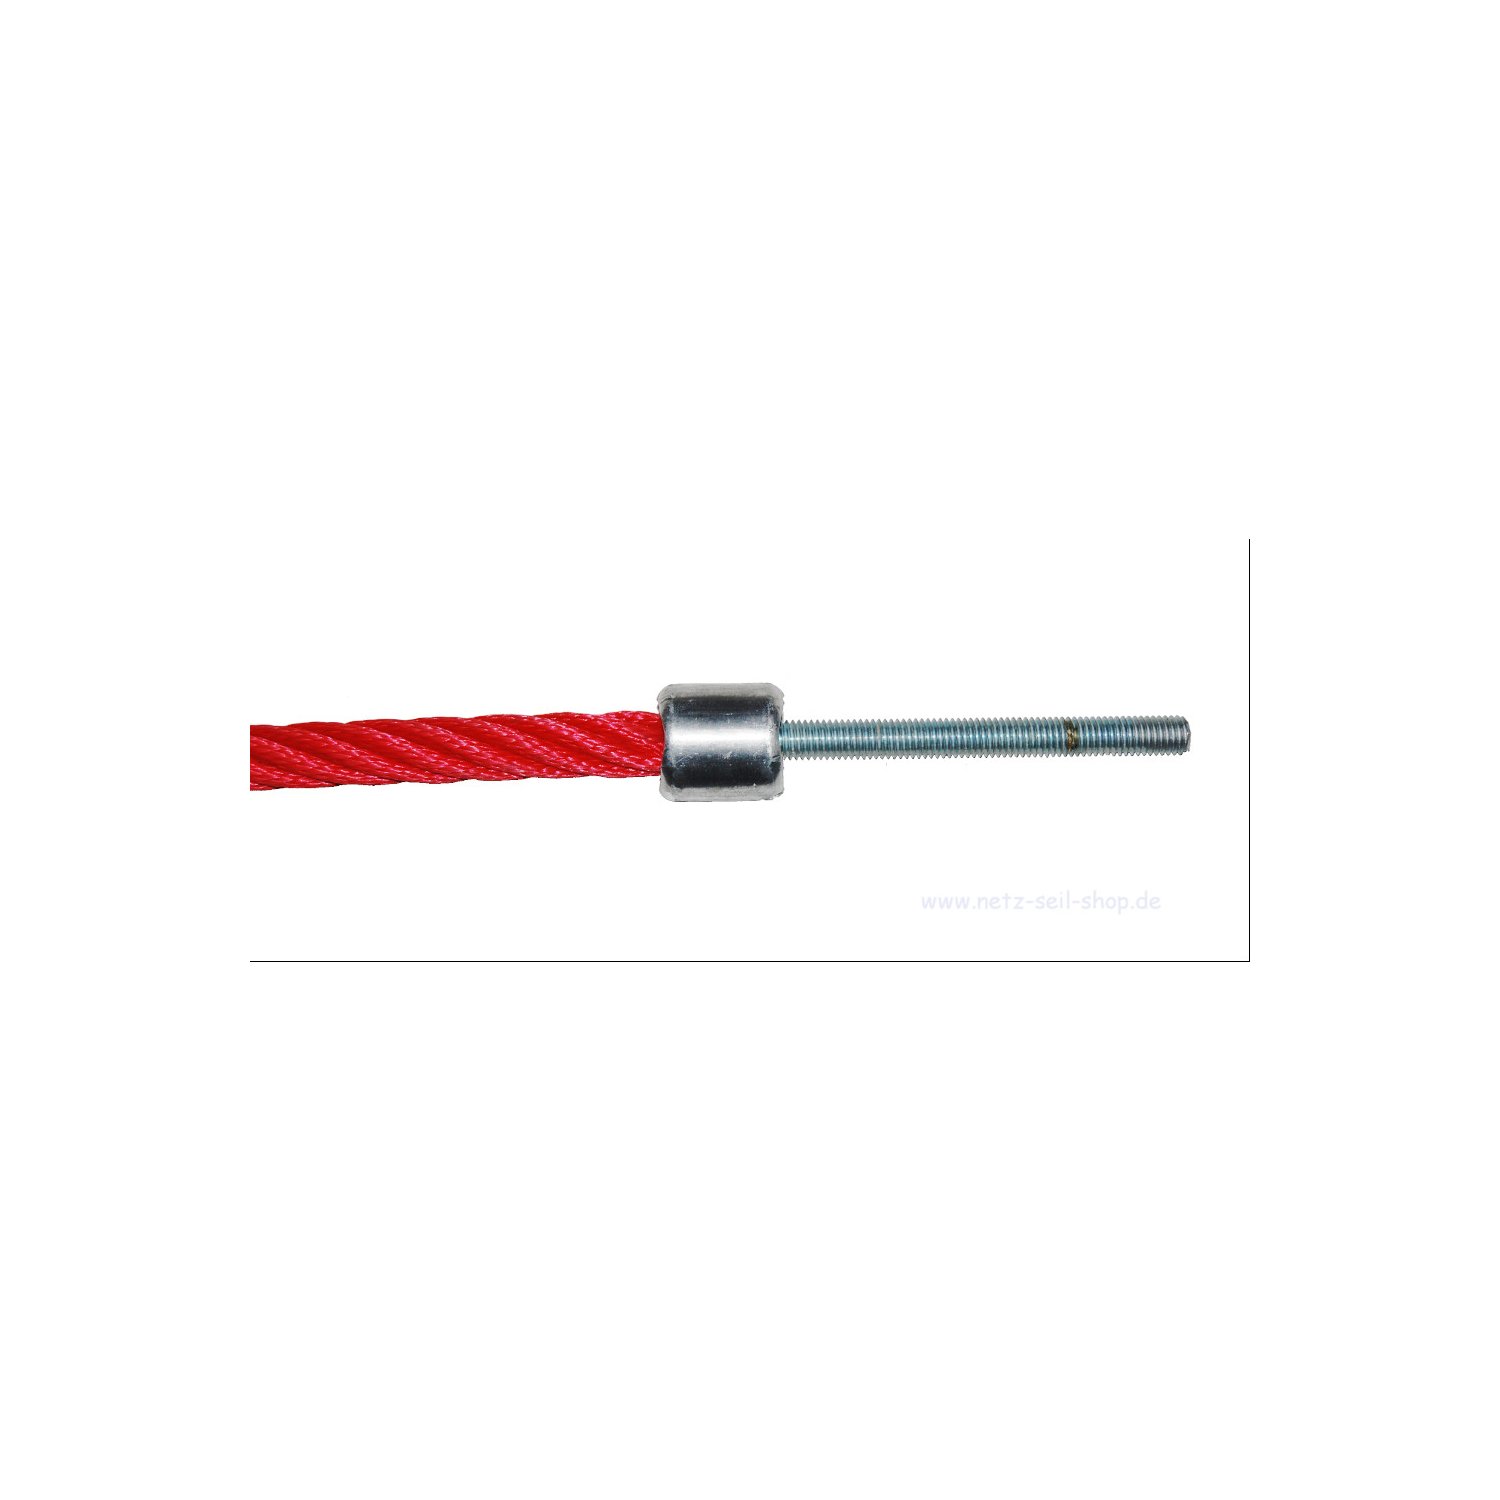 Threaded bolt M12 x 160mm, galvanised, directly pressed [11,90 EUR]